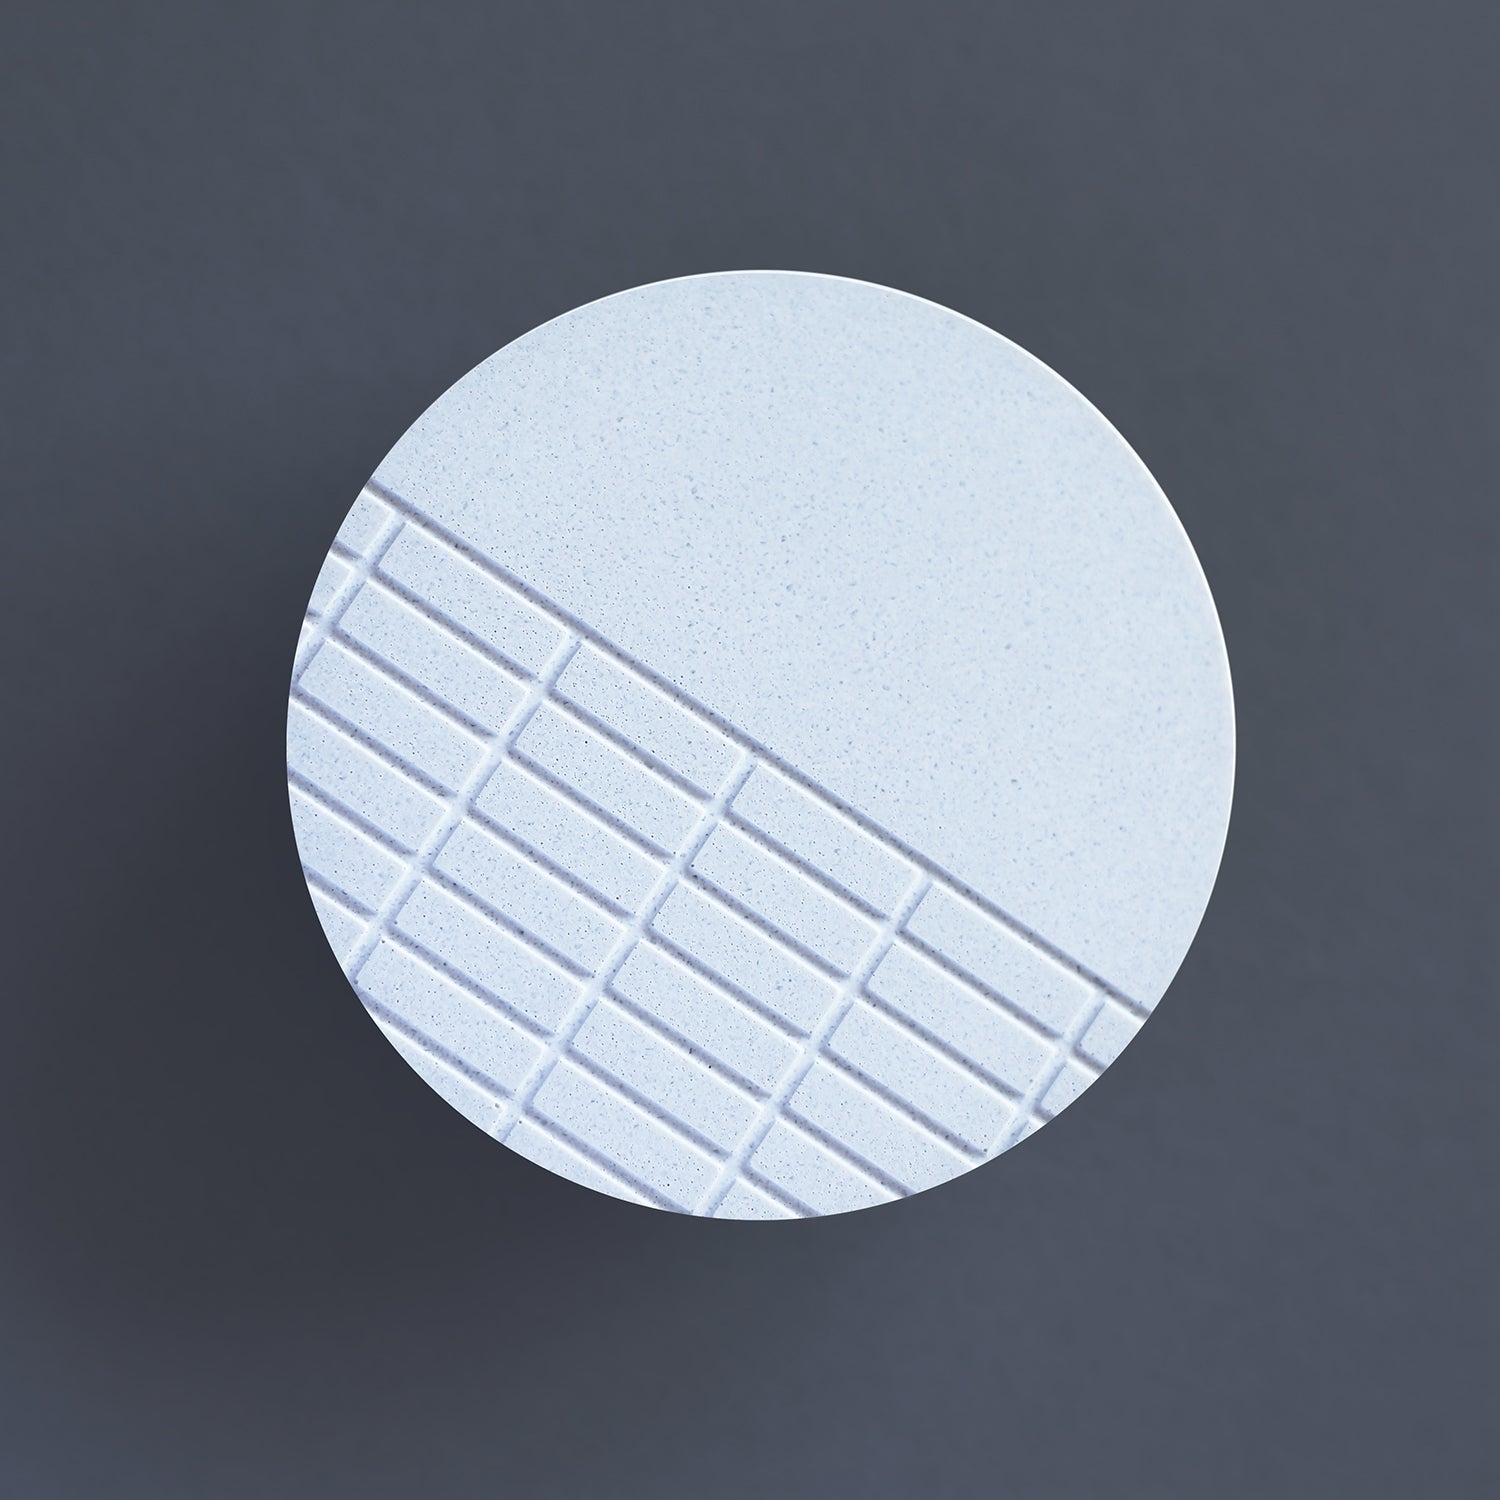 Handcast brooch inspired by the brutalist architecture of London's Barbican centre. This circular brooch has a fine grid recessed over half of the surface. Each brooch is cast by hand in our south London studio and comes in branded gift box. (7cm diameter) 